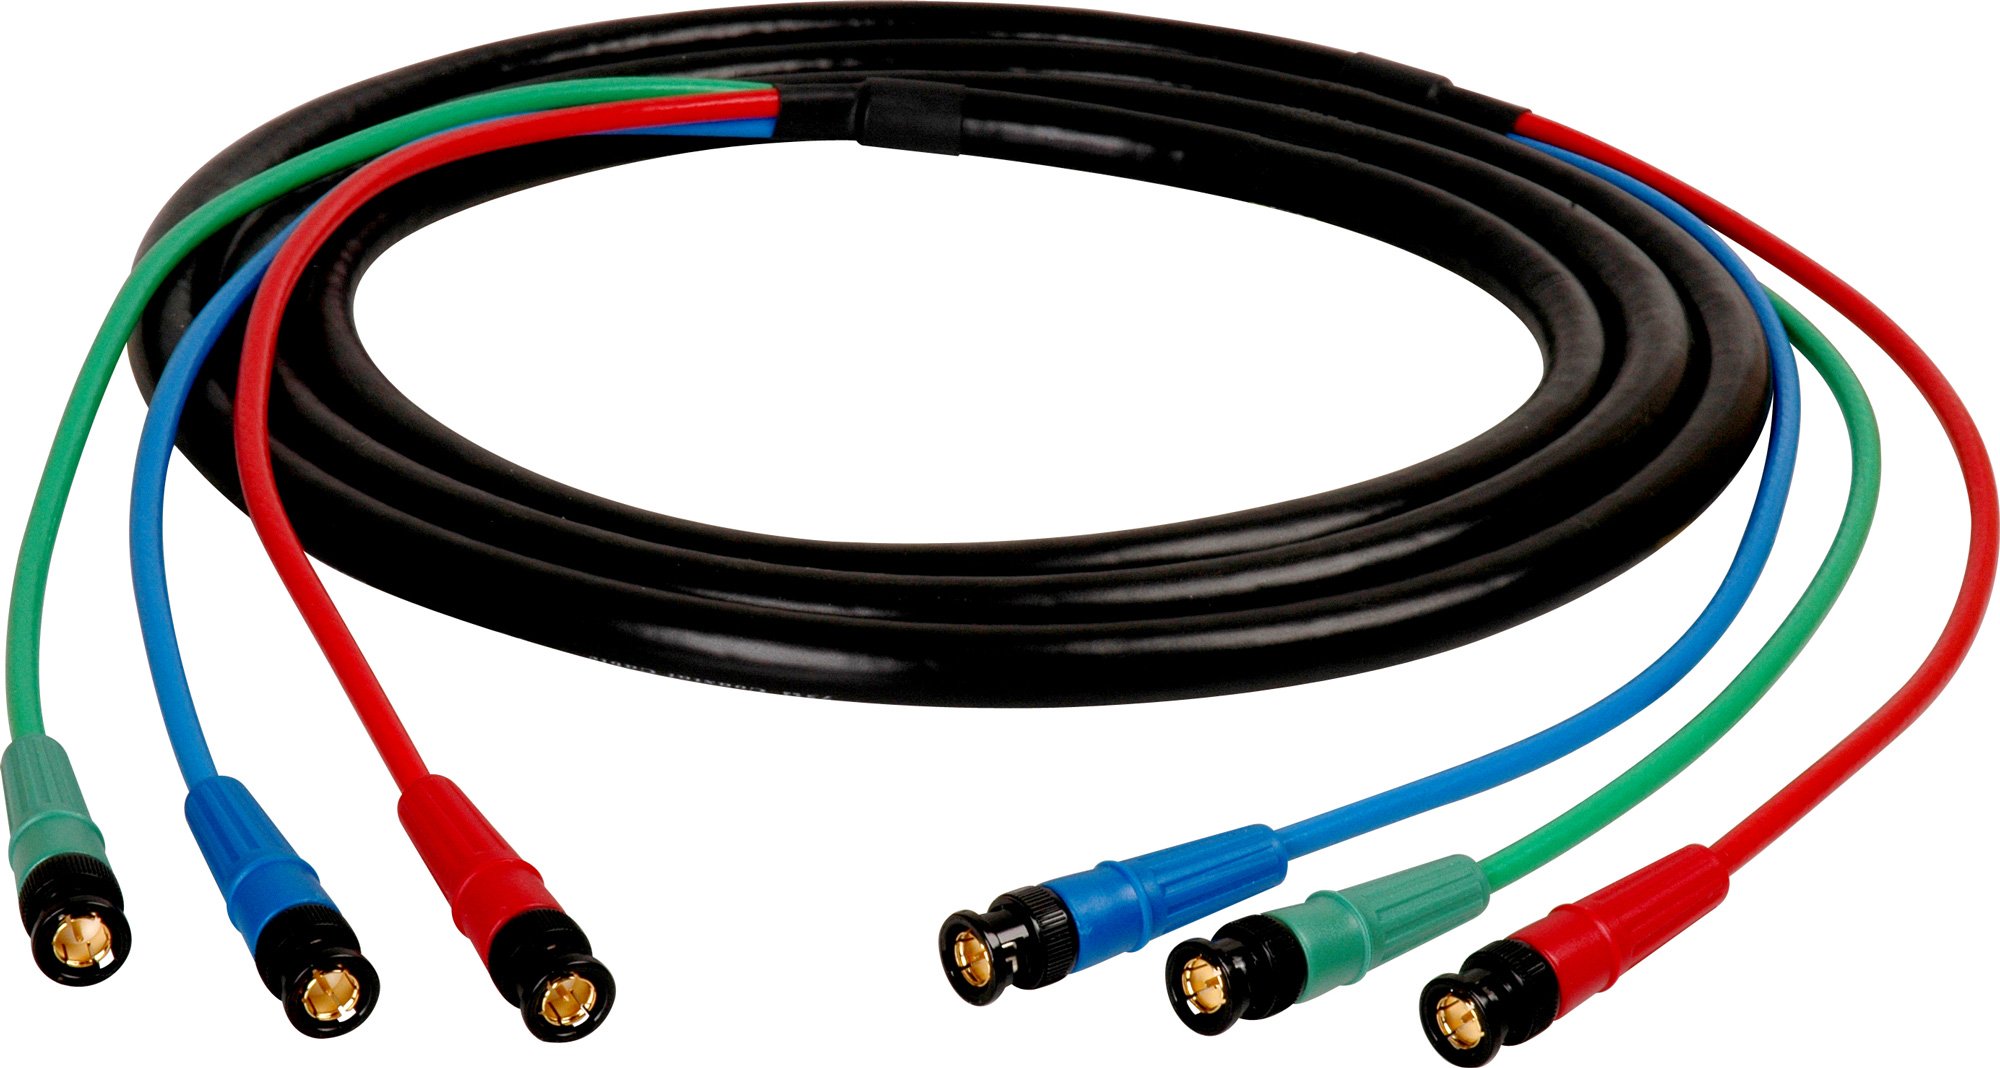 3-4-5 Component Video Cables